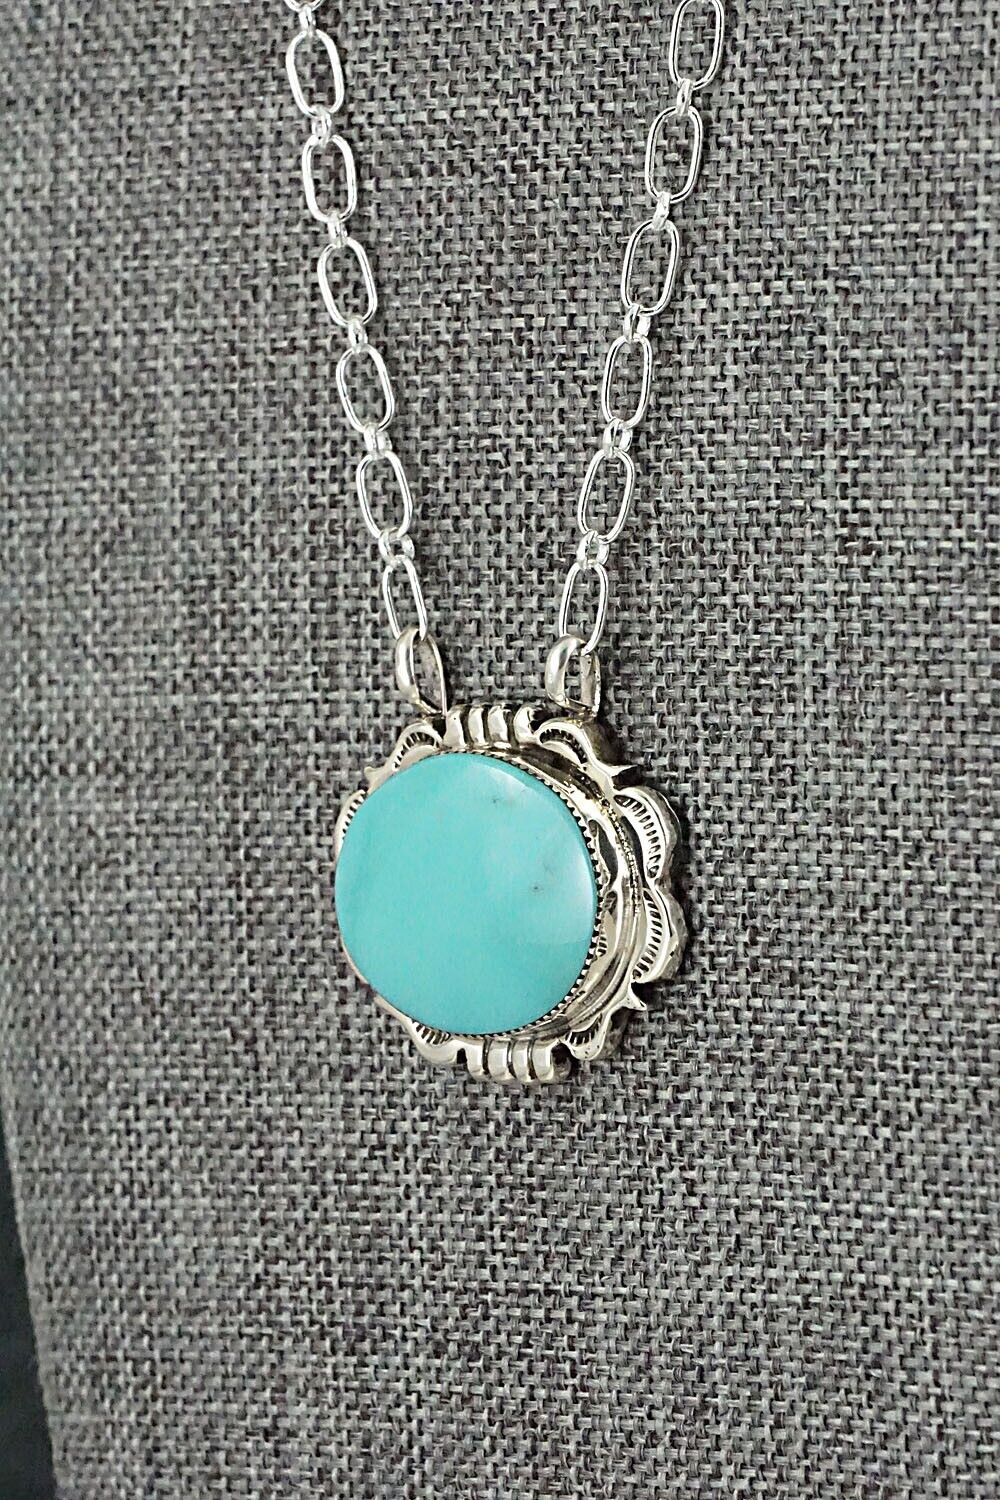 Turquoise & Sterling Silver Necklace - Leroy Silversmith